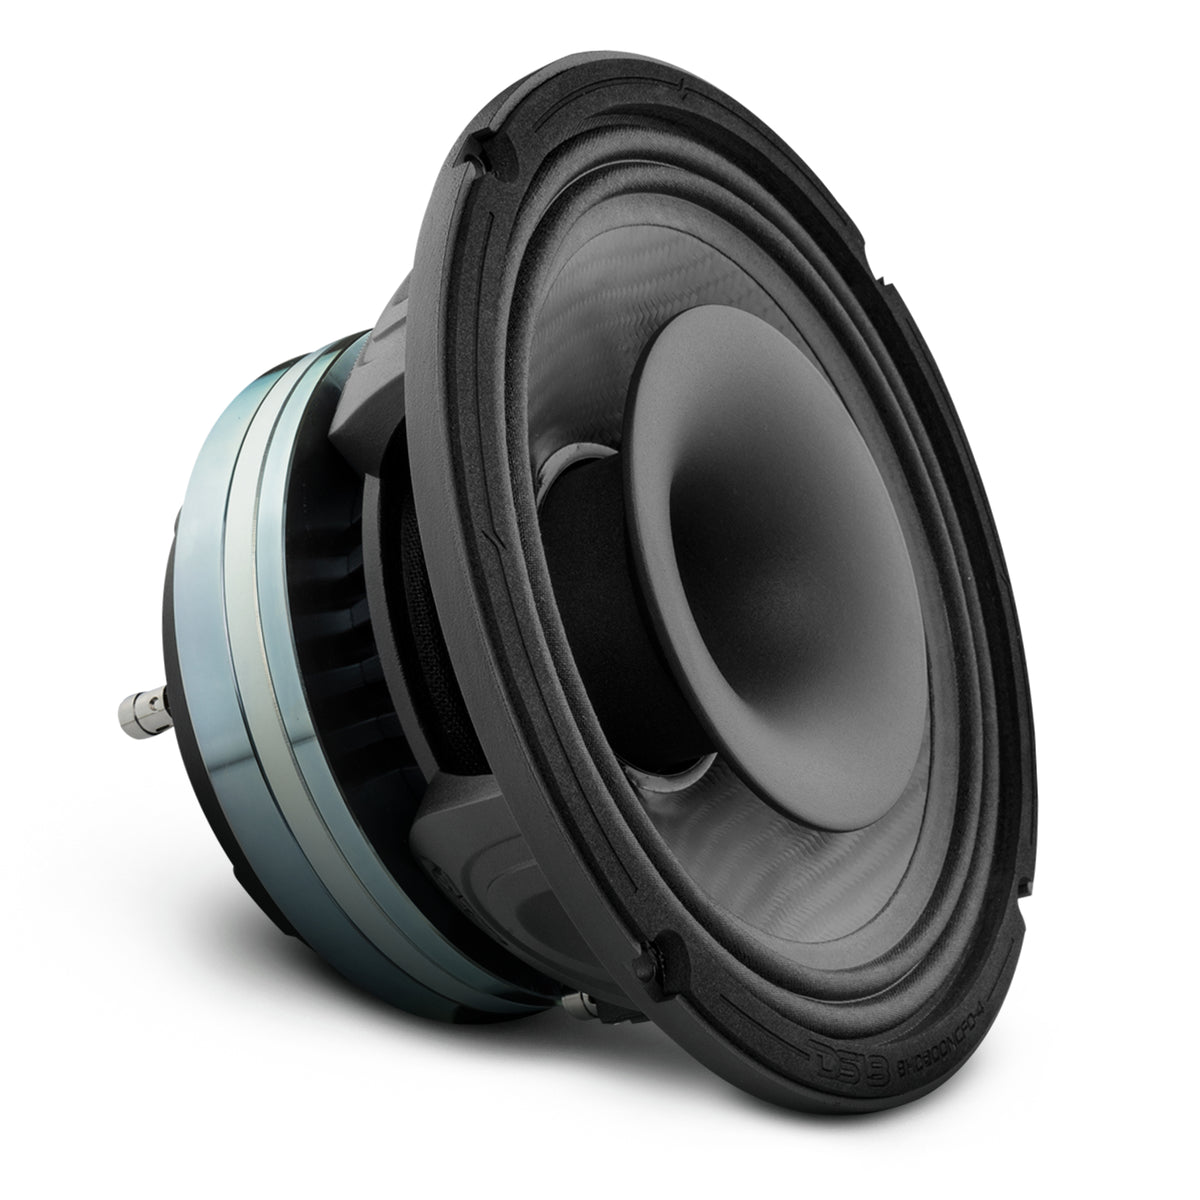 Mid-Bass With Built in Coaxial Hybrid Driver Neodymium Magnet